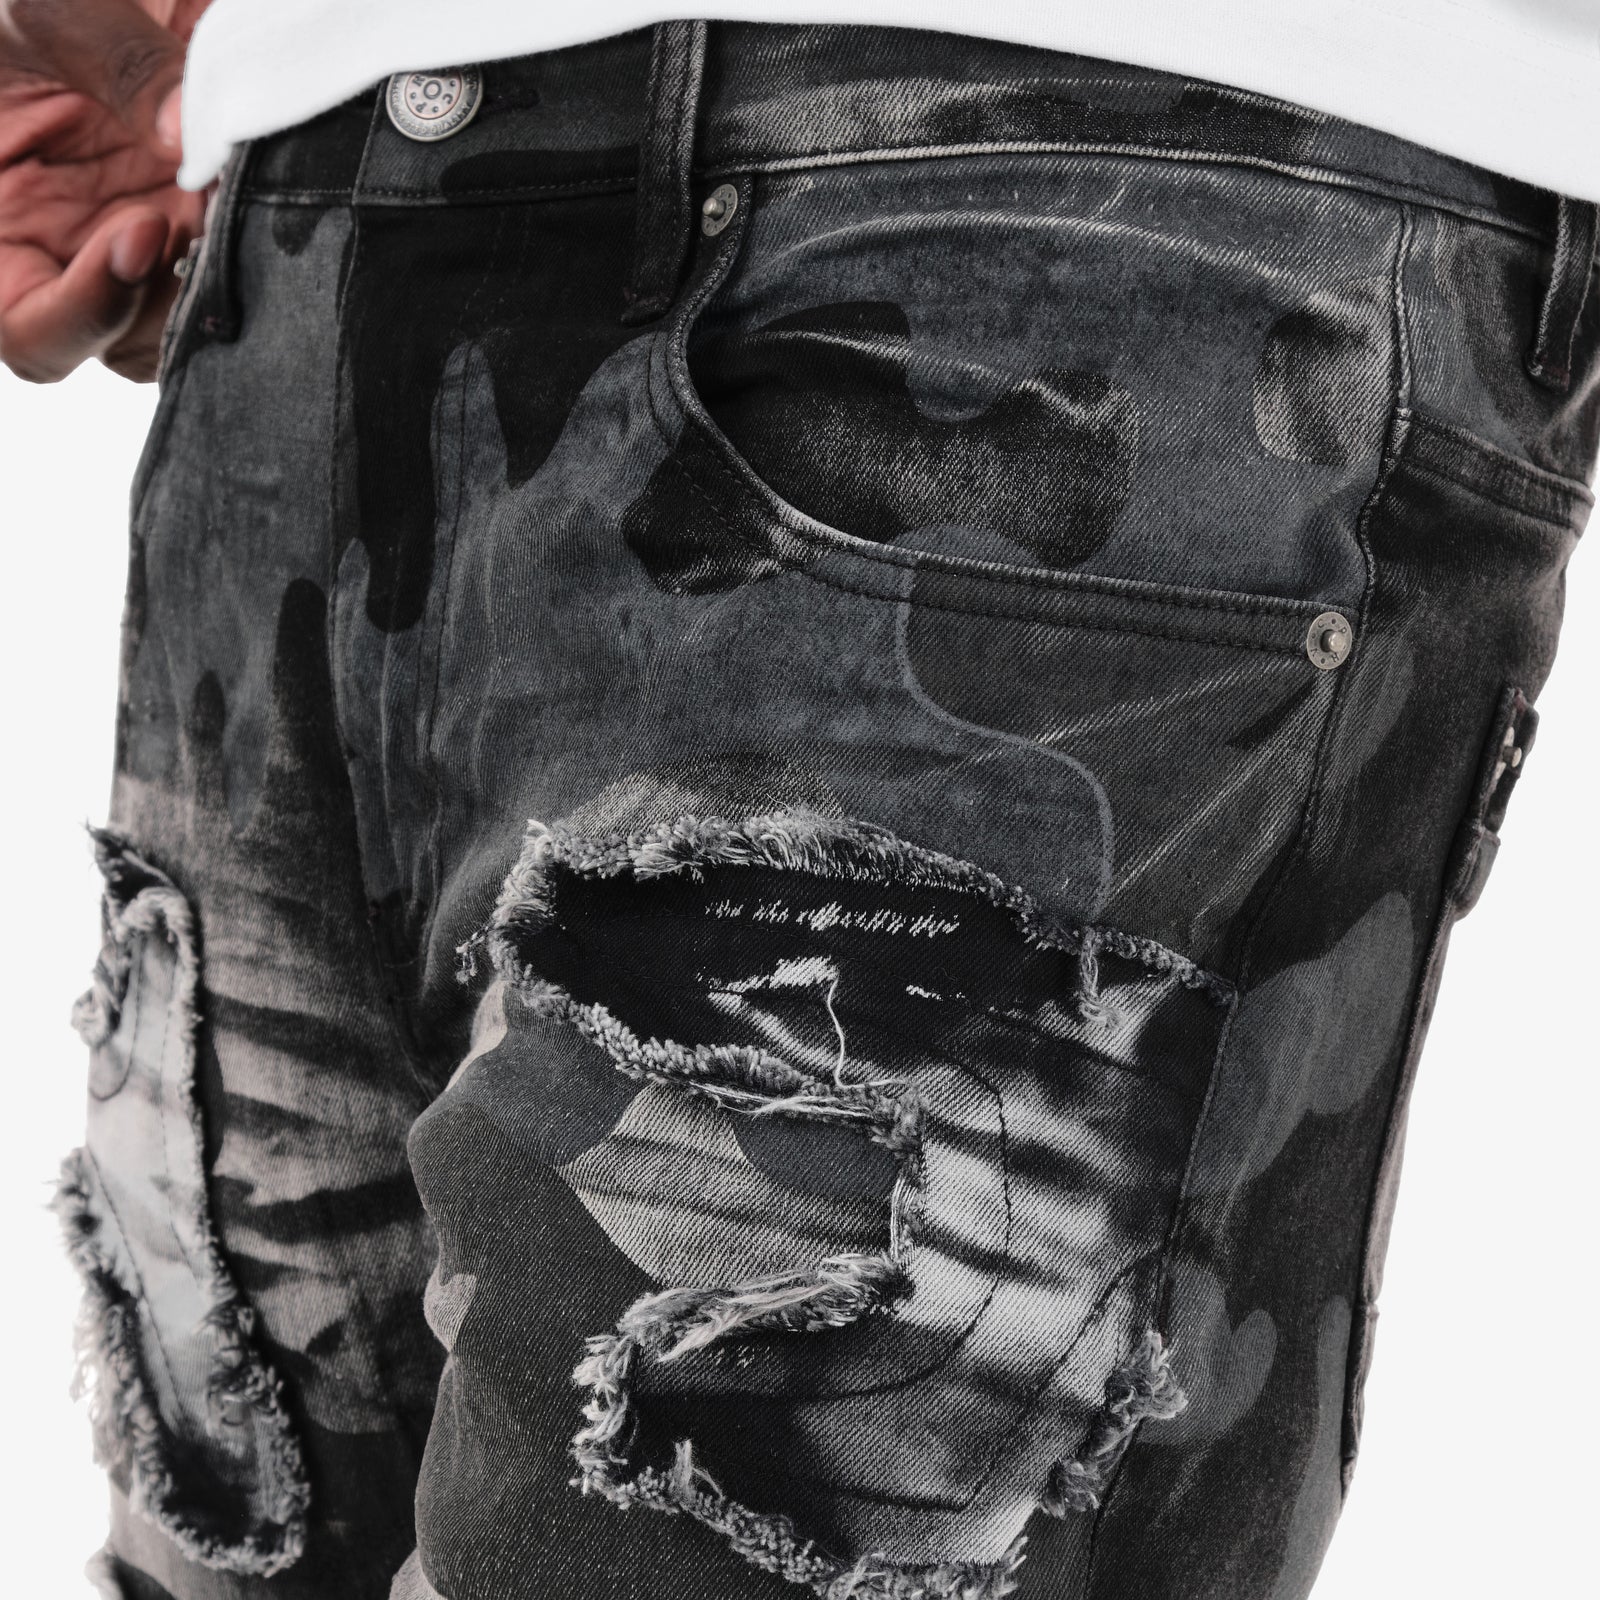 BLACK SAND STACKED CAMO JEANS